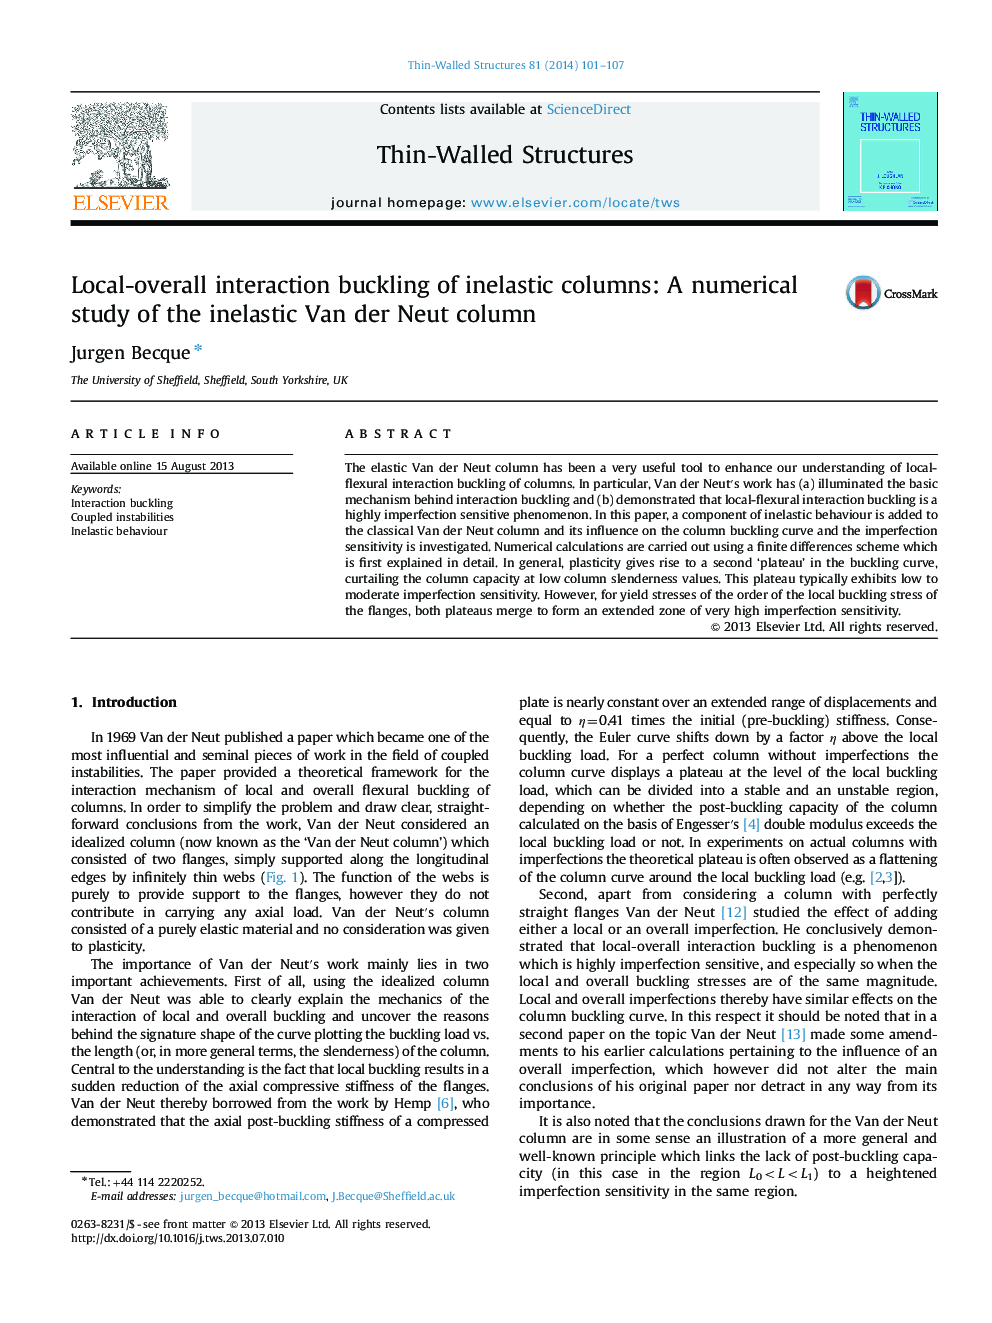 Local-overall interaction buckling of inelastic columns: A numerical study of the inelastic Van der Neut column